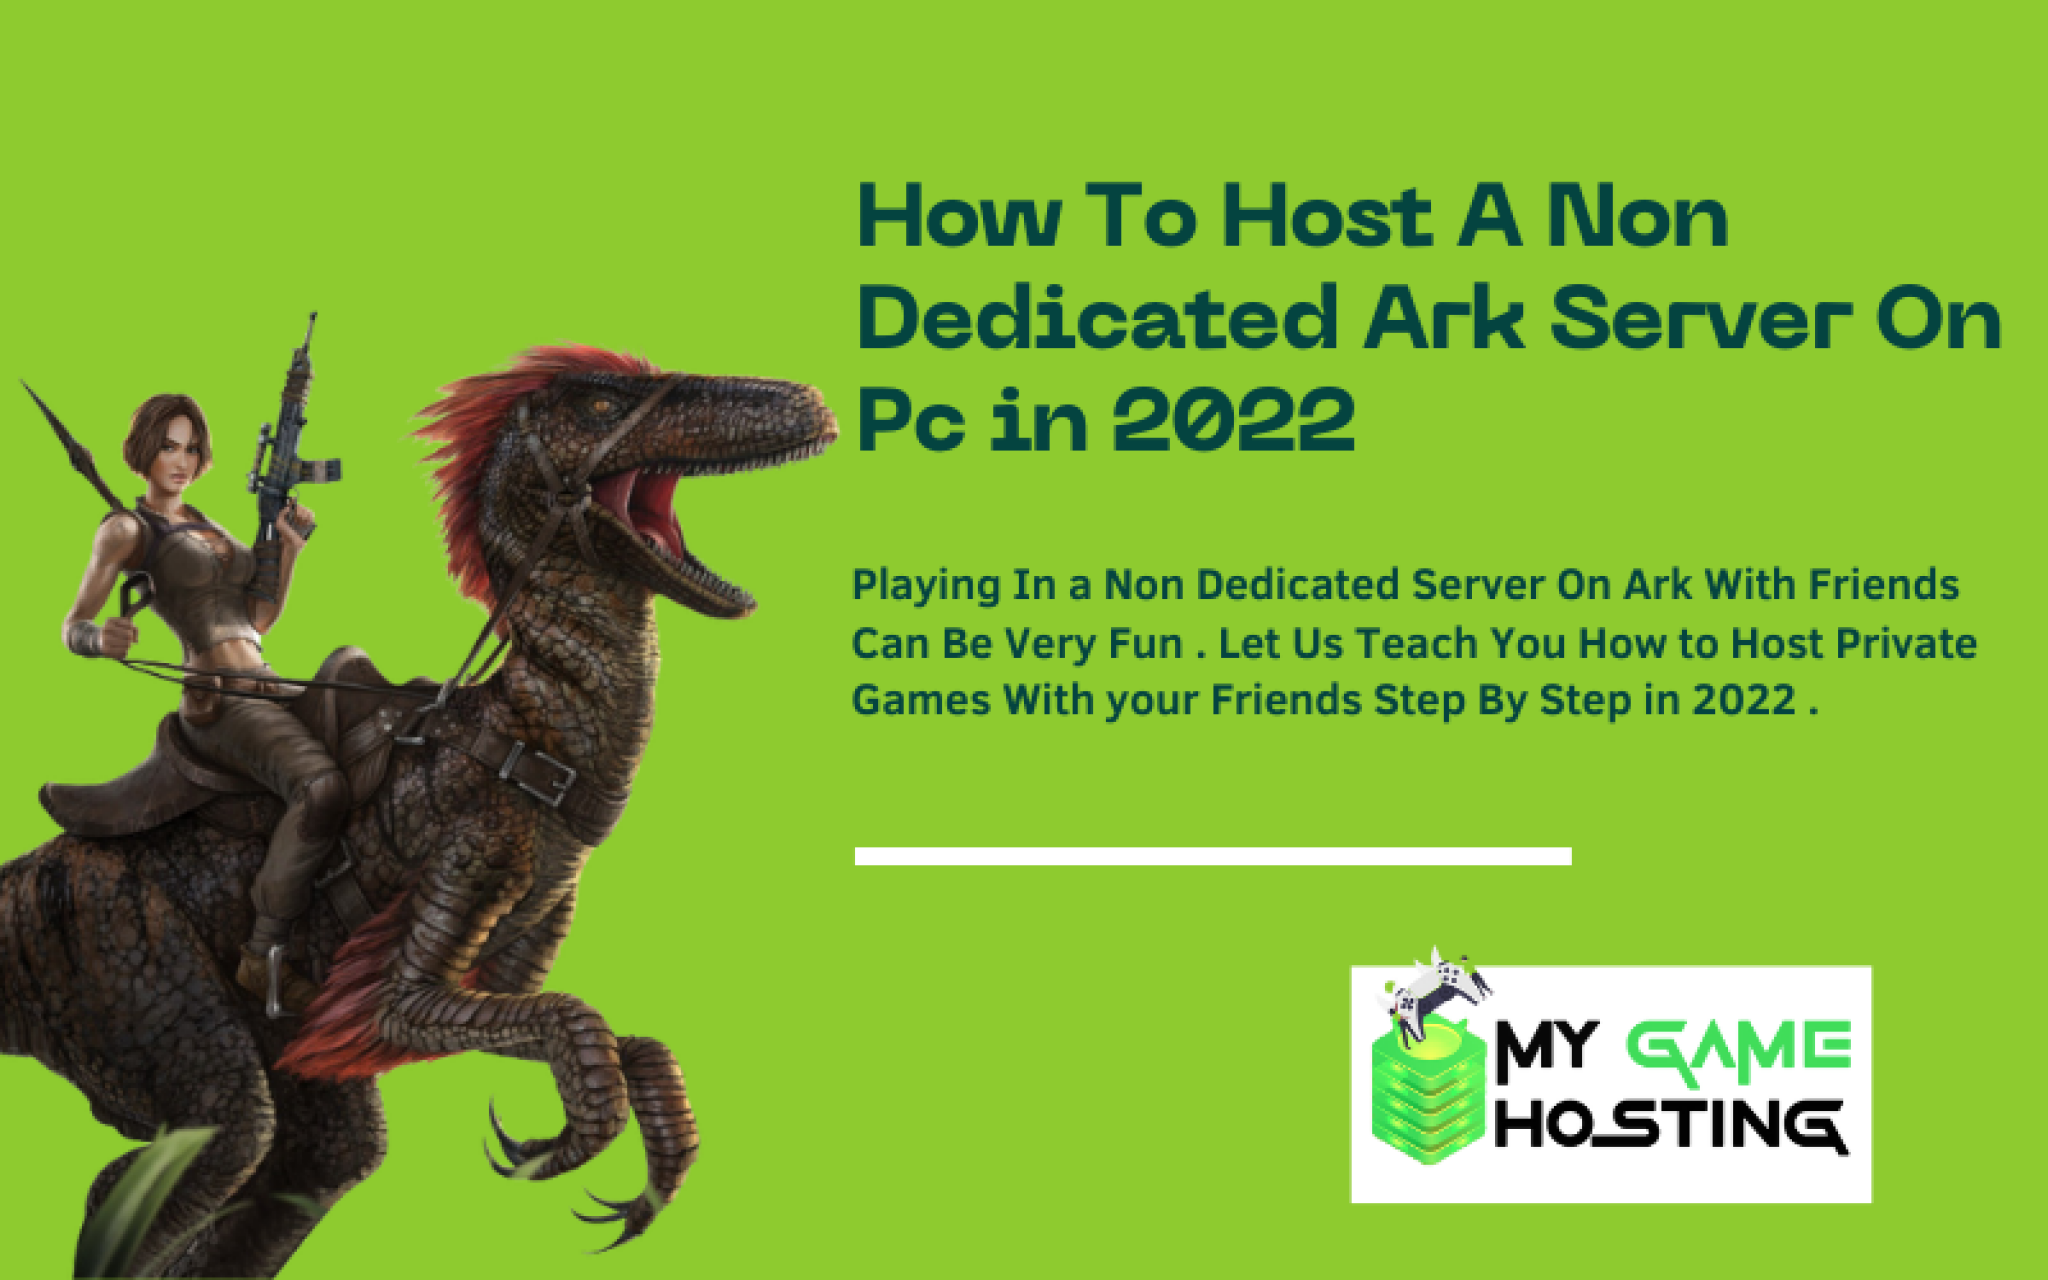 How To Host A Non Dedicated Ark Server 2022